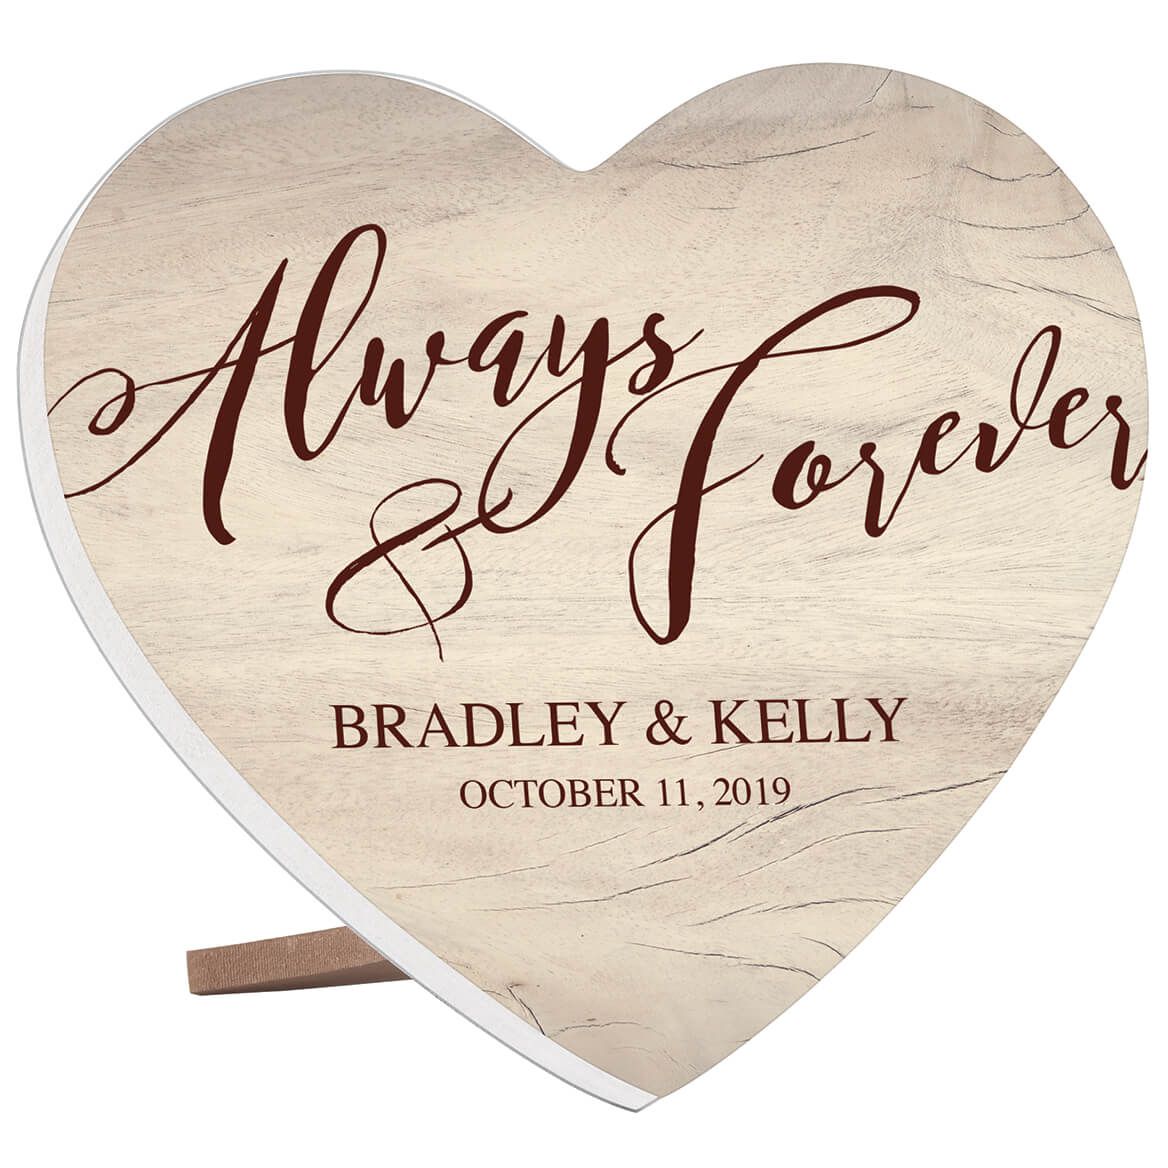 Personalized "Always & Forever" Heart Table Sitter + '-' + 372916